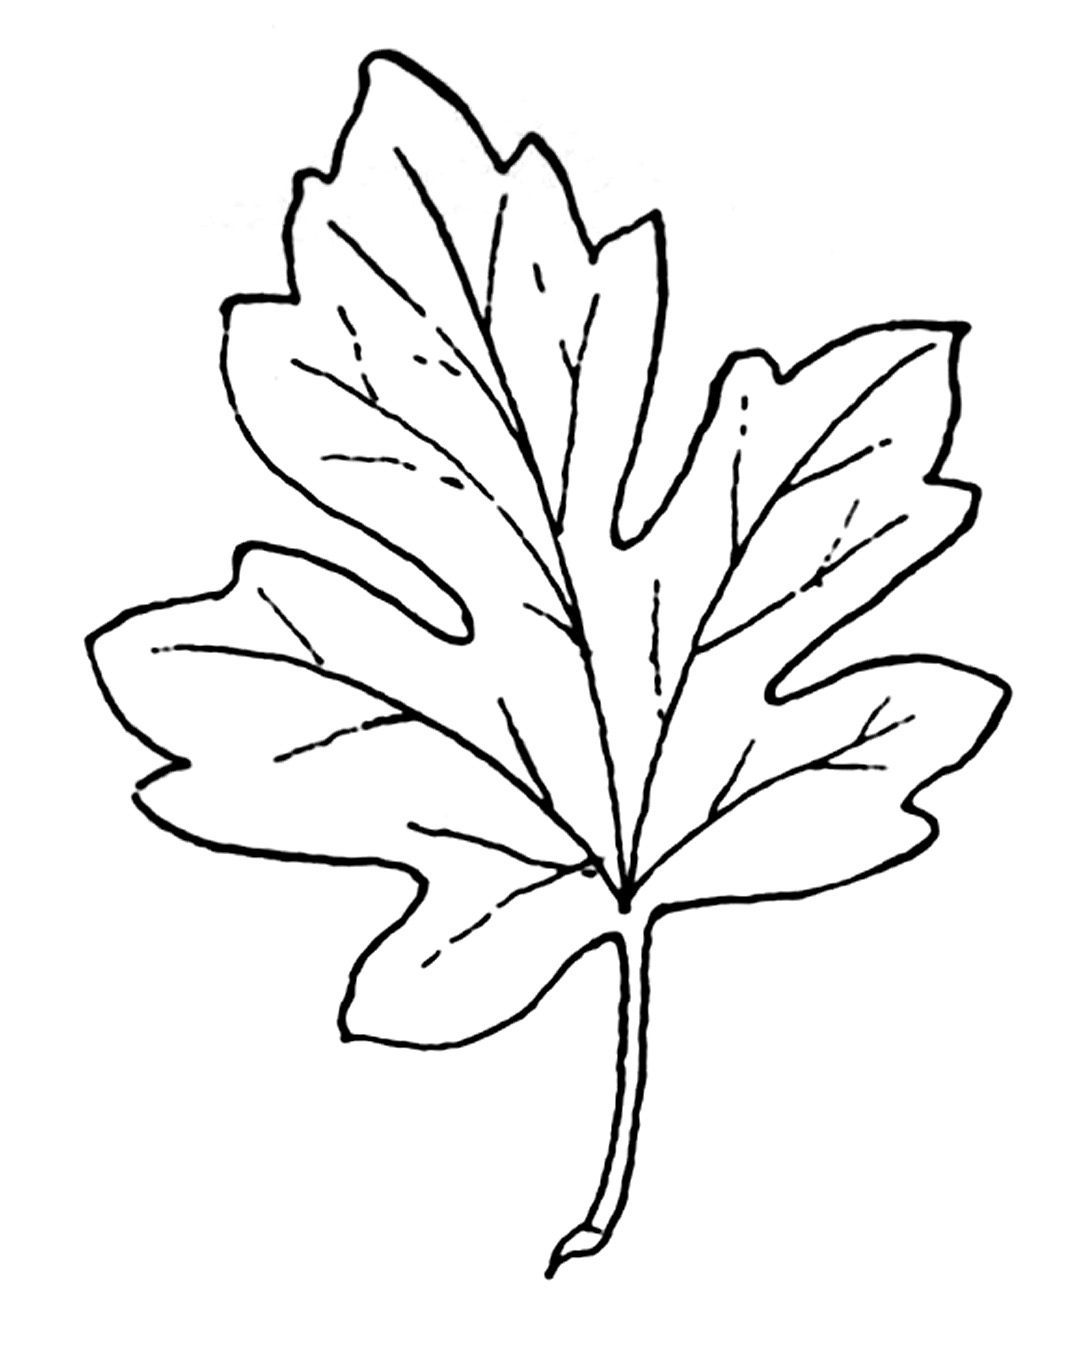 Fall Leaf Clip Art Black And White Your Getting Your First Image